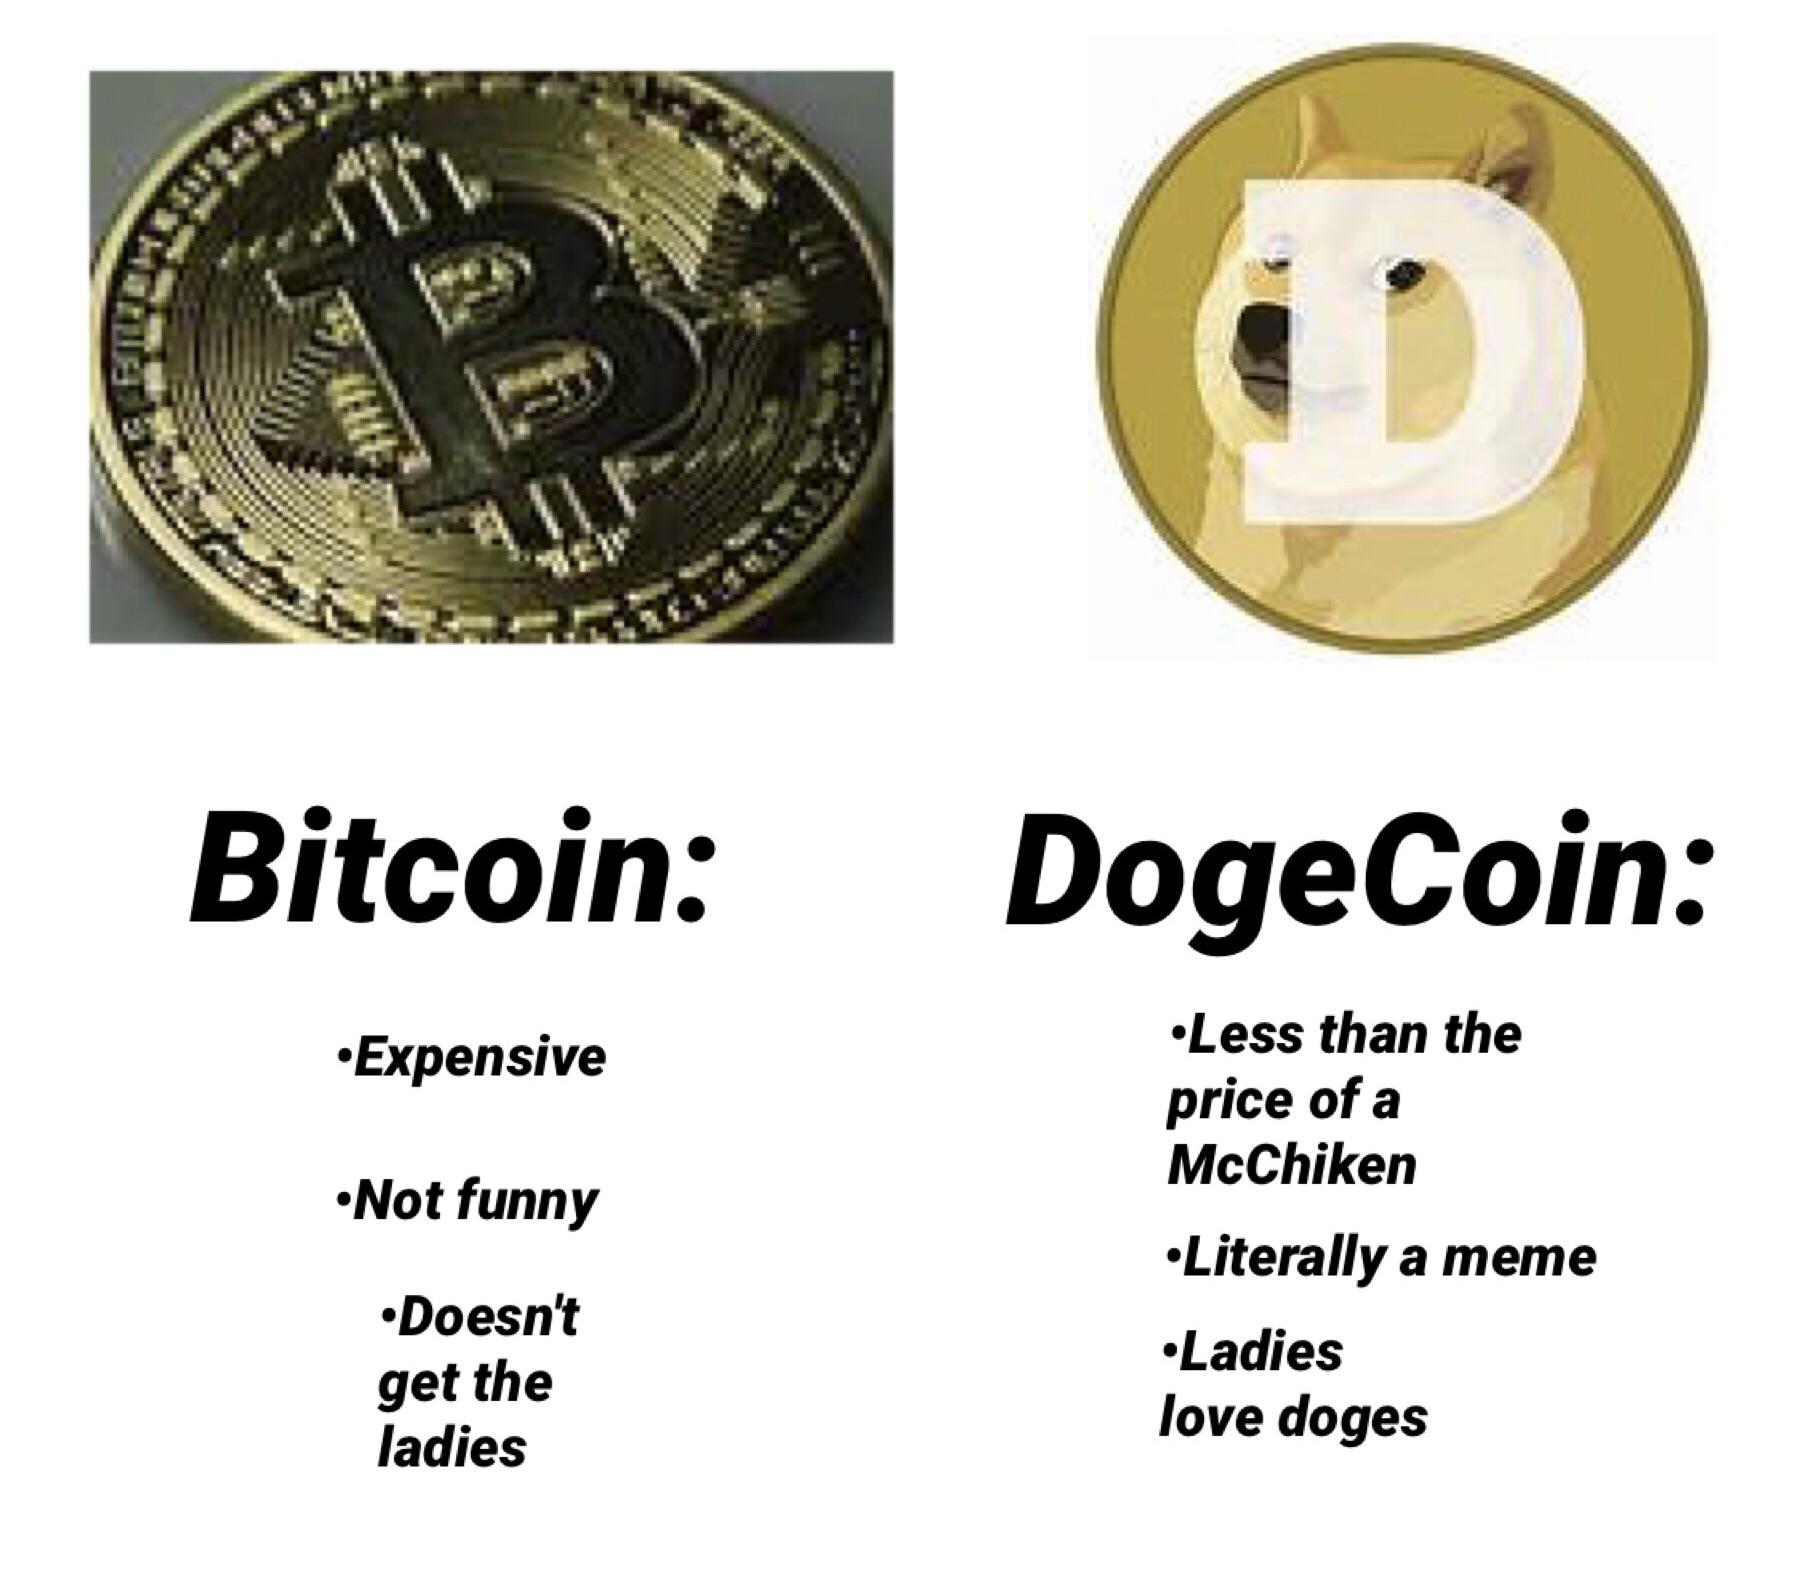 Dogecoin Vs. Bitcoin: Exploring the Differences and Similarities